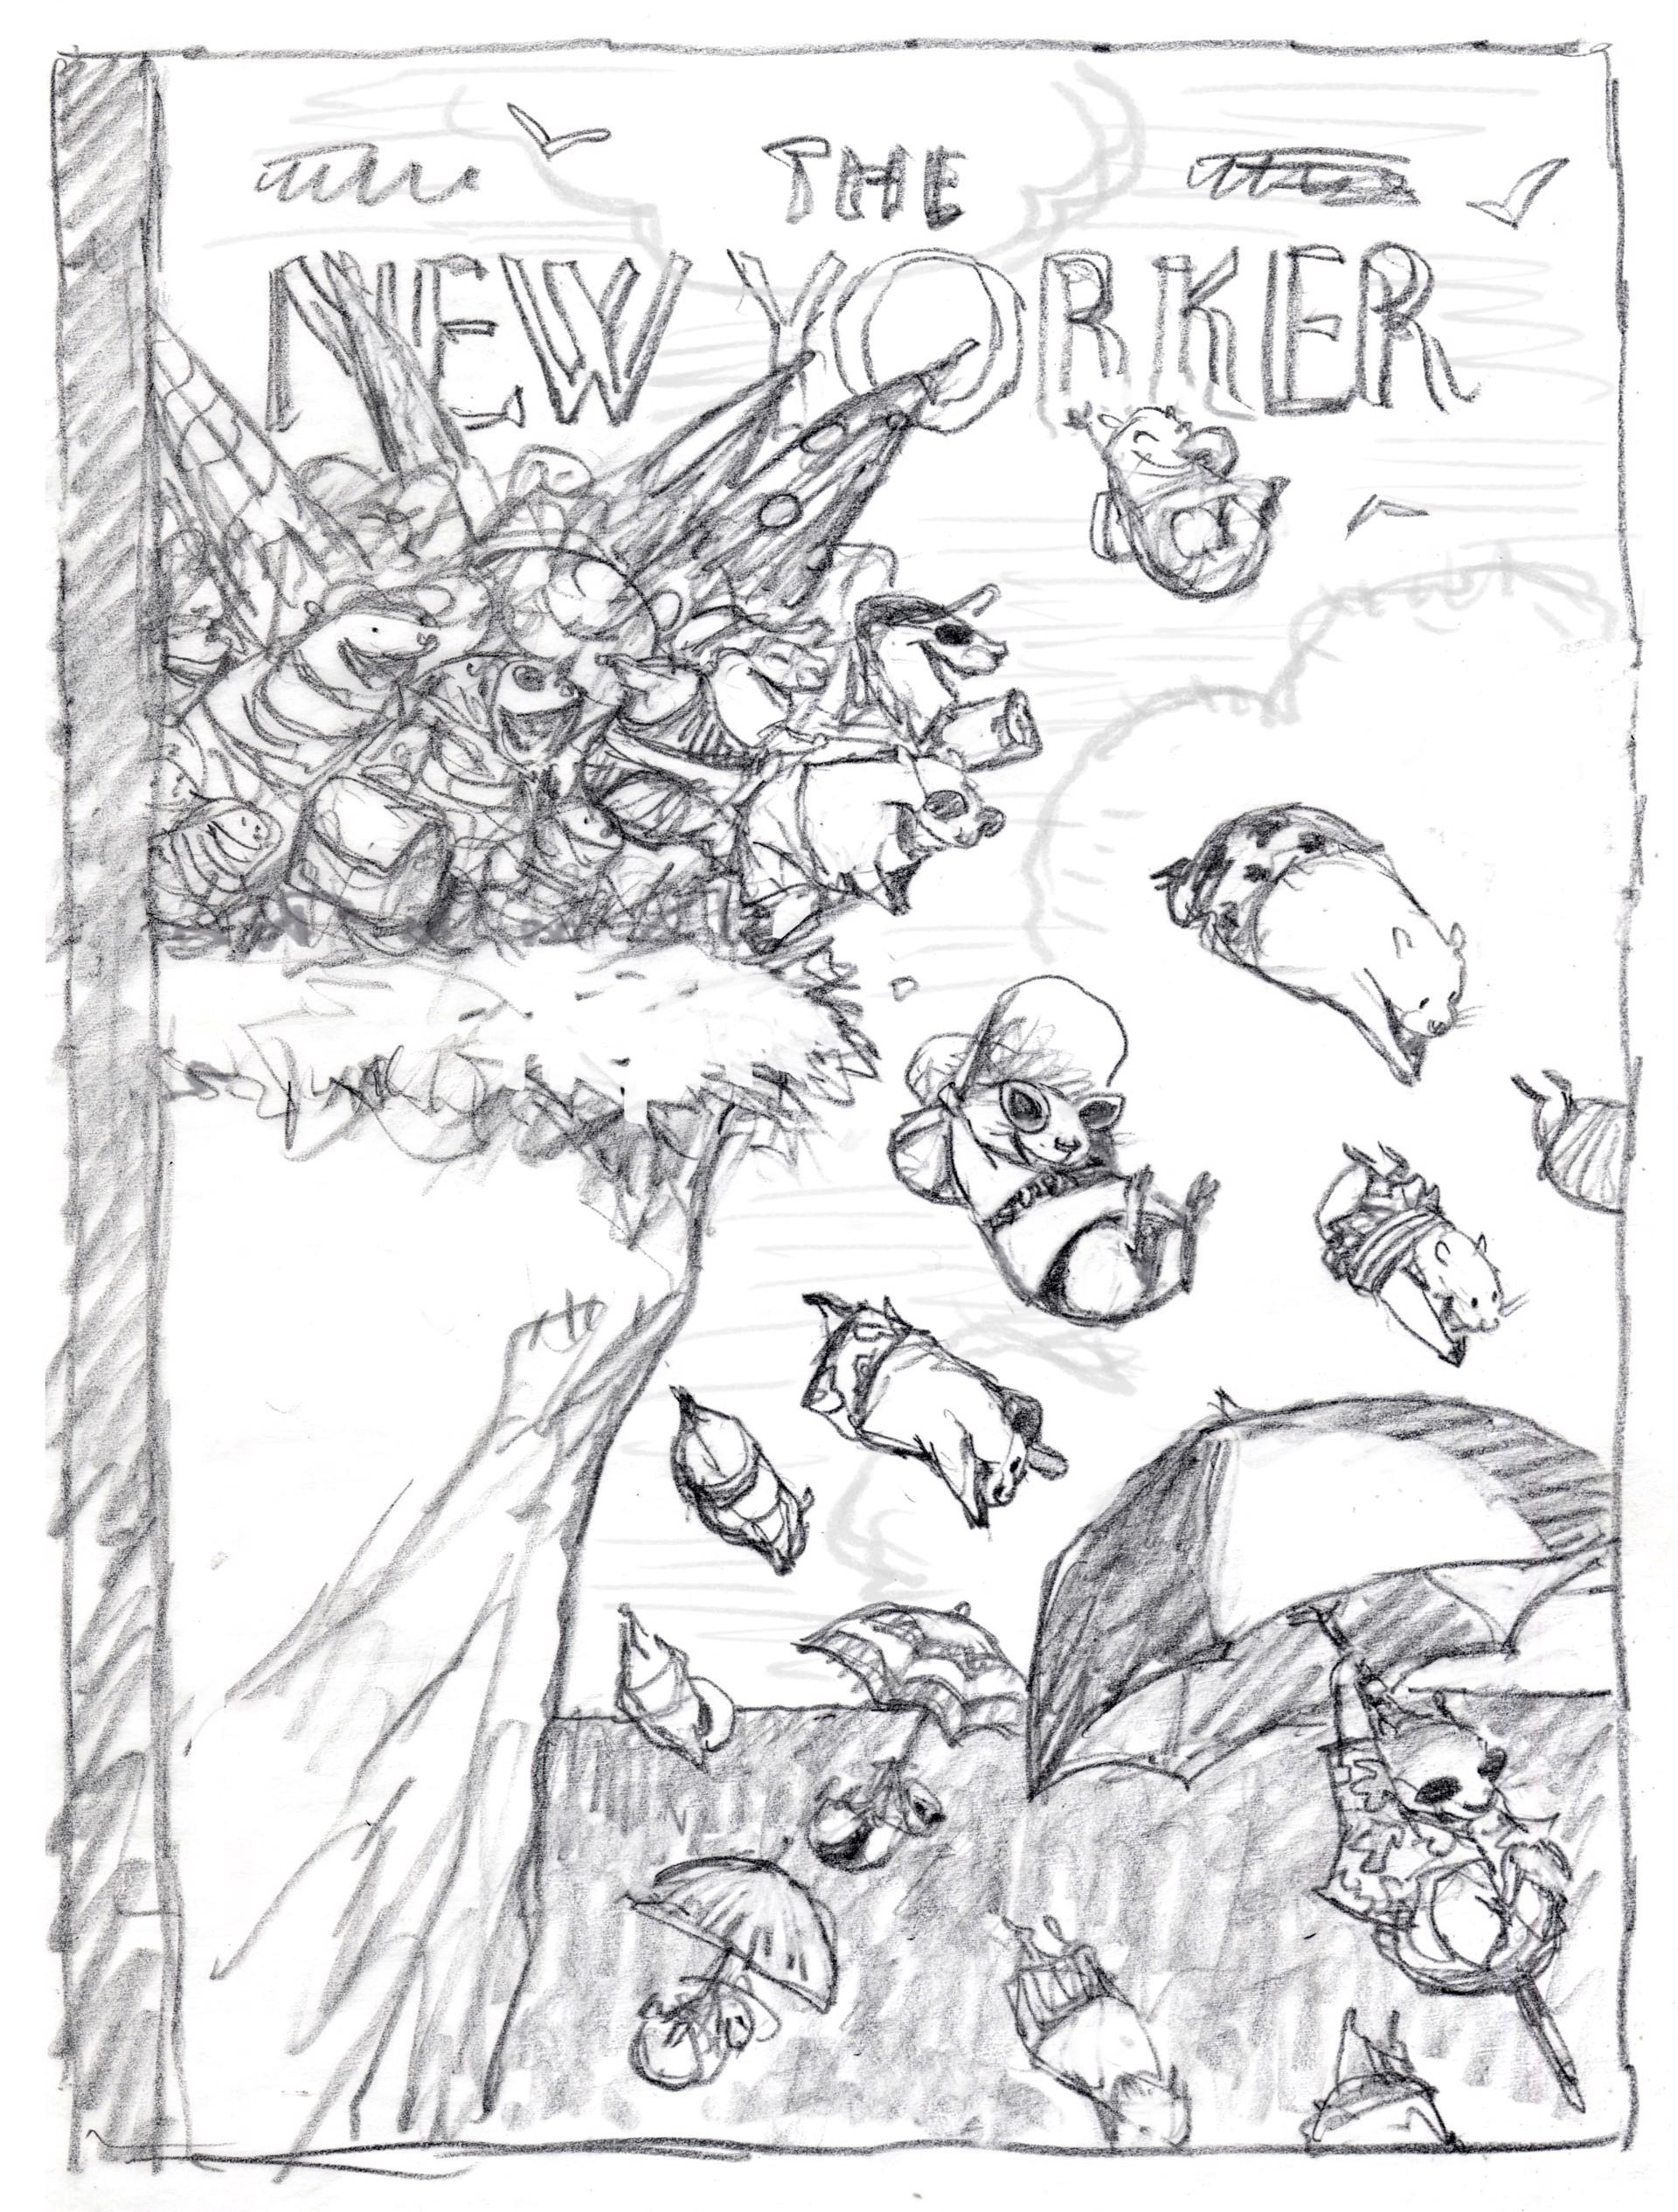 Proposed sketch for New Yorker cover "To the sea!" by Peter de Sève